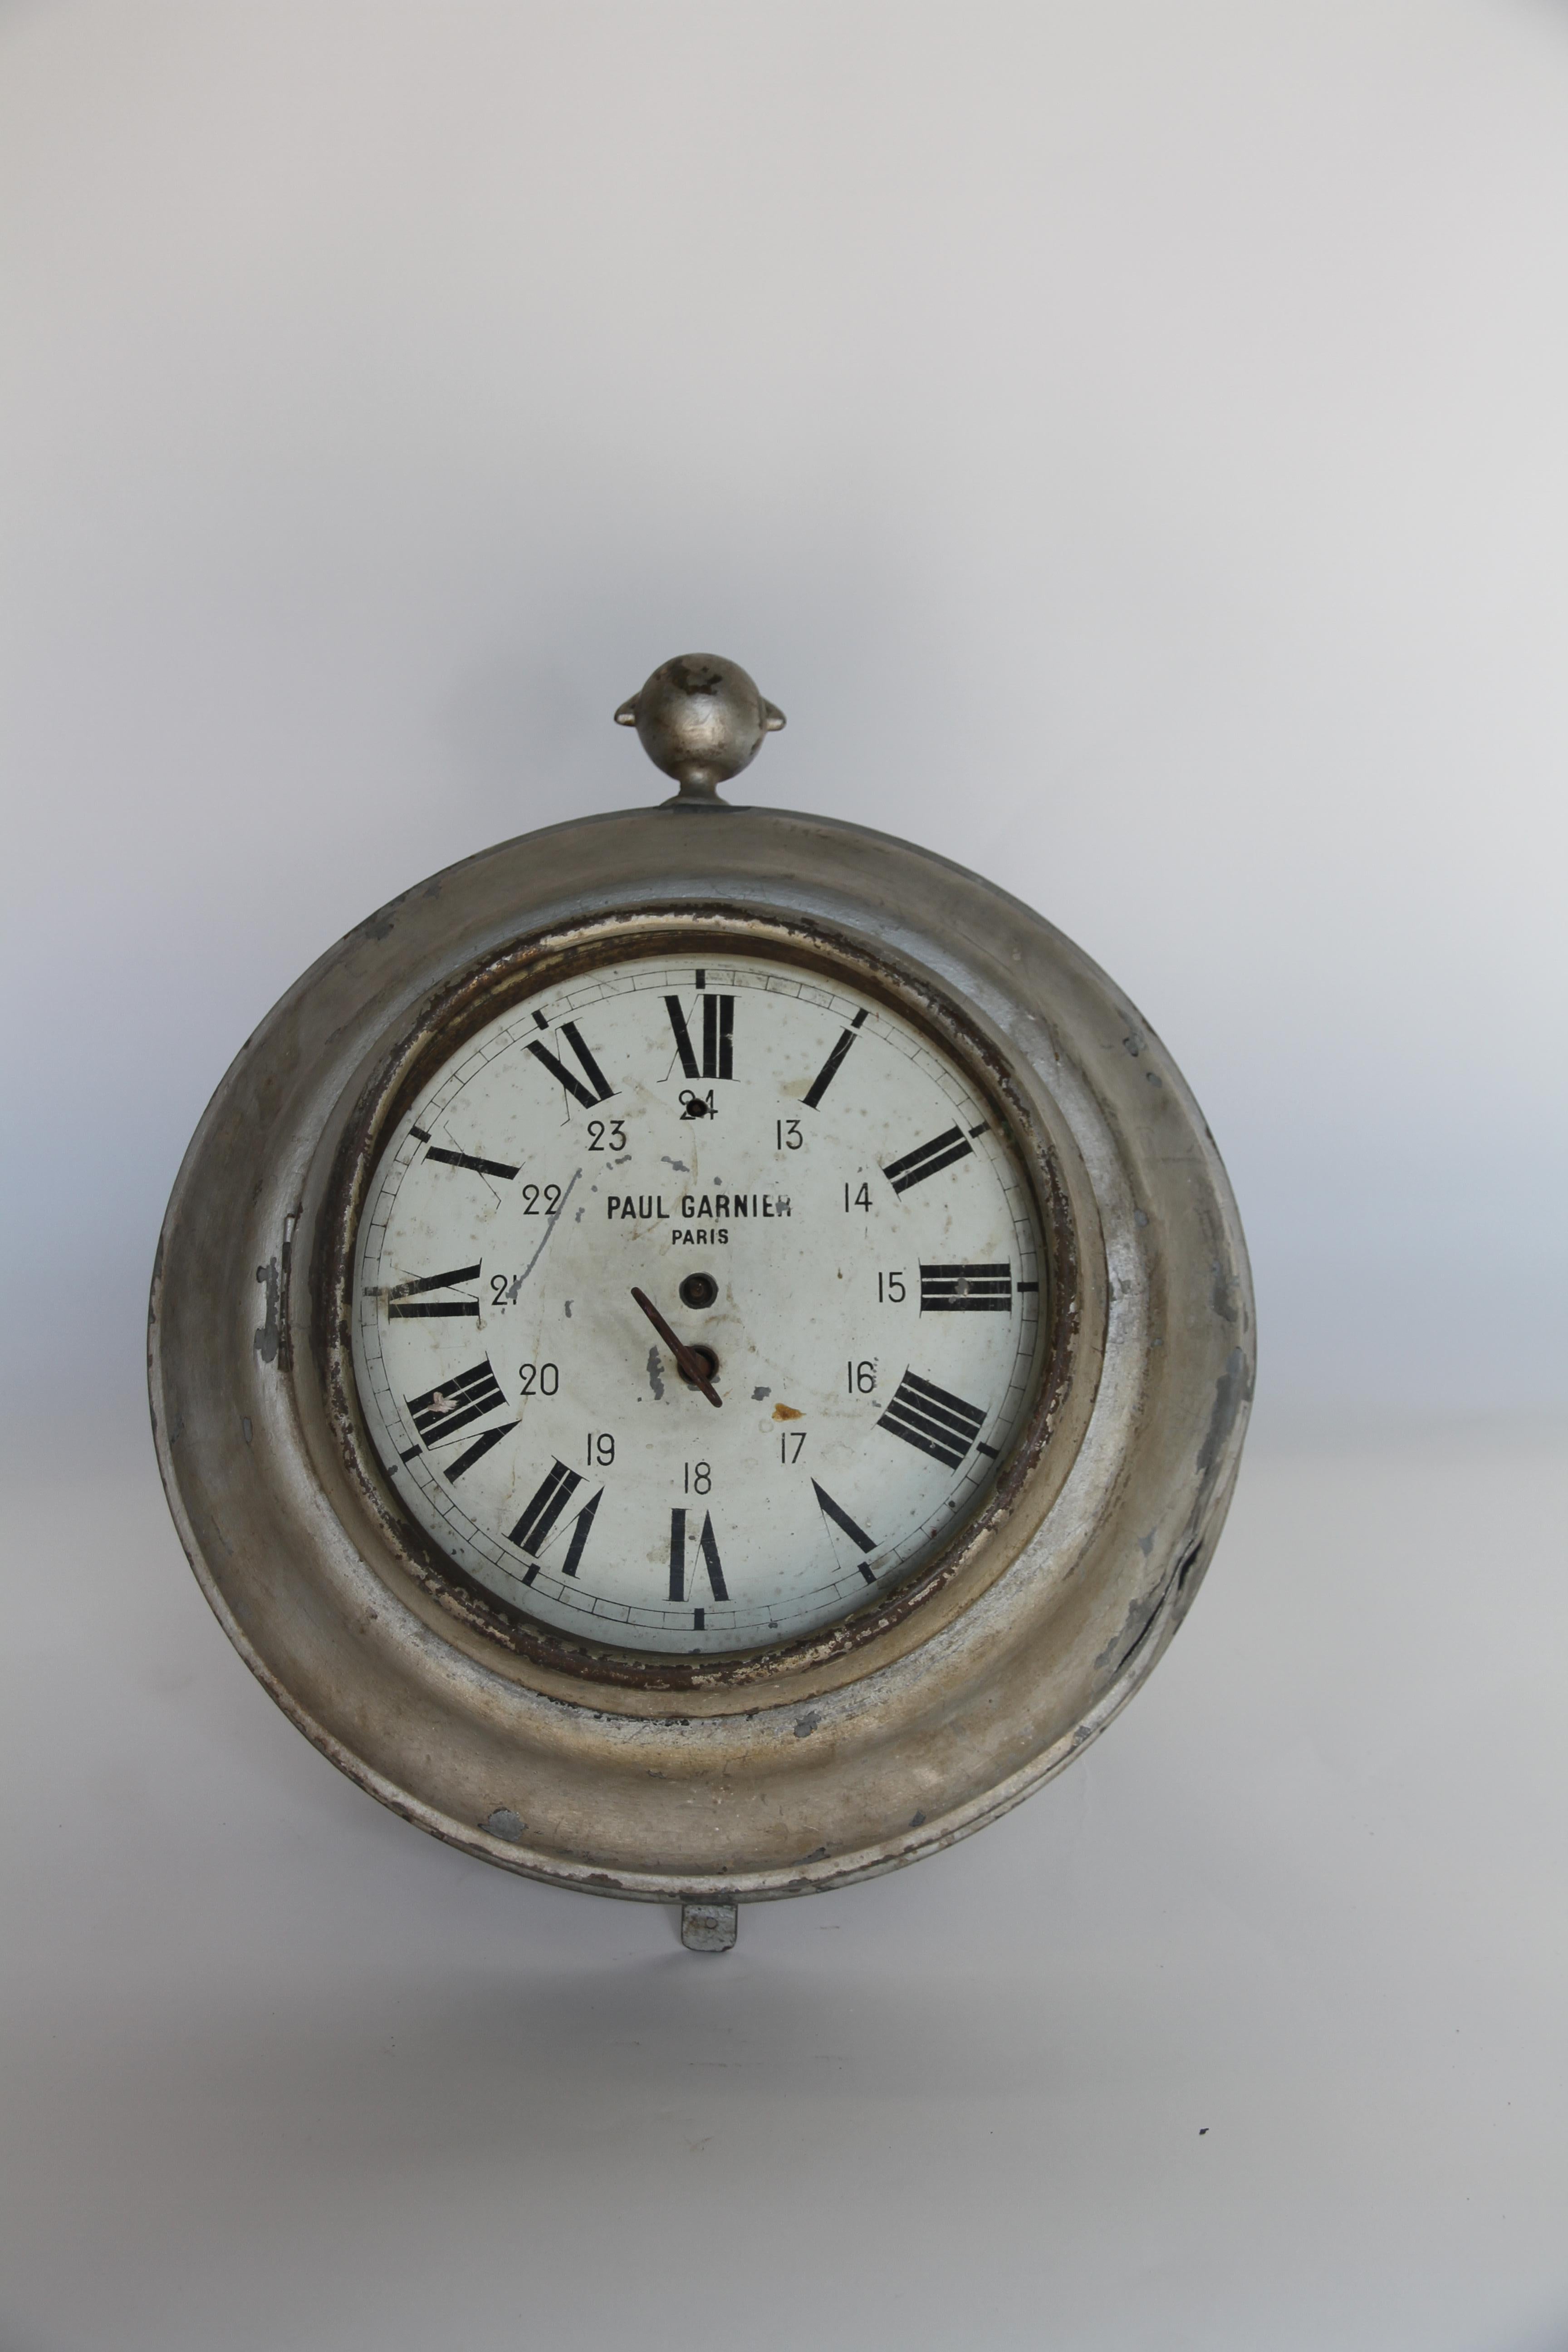 An antique French wall clock. Made of zinc the 9.75